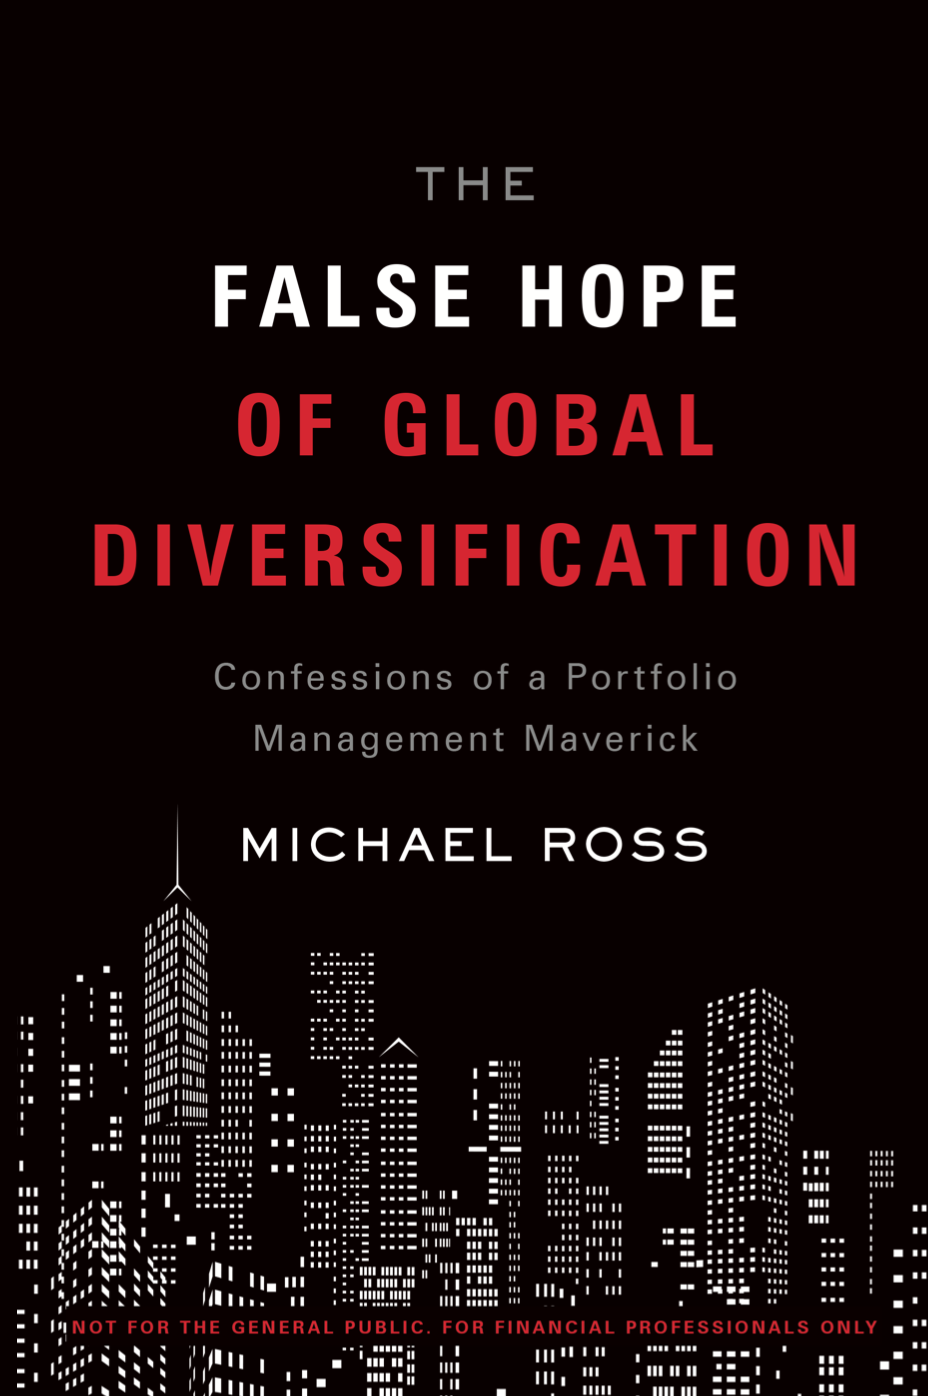 The False Hope of Global Diversification by Michael Ross